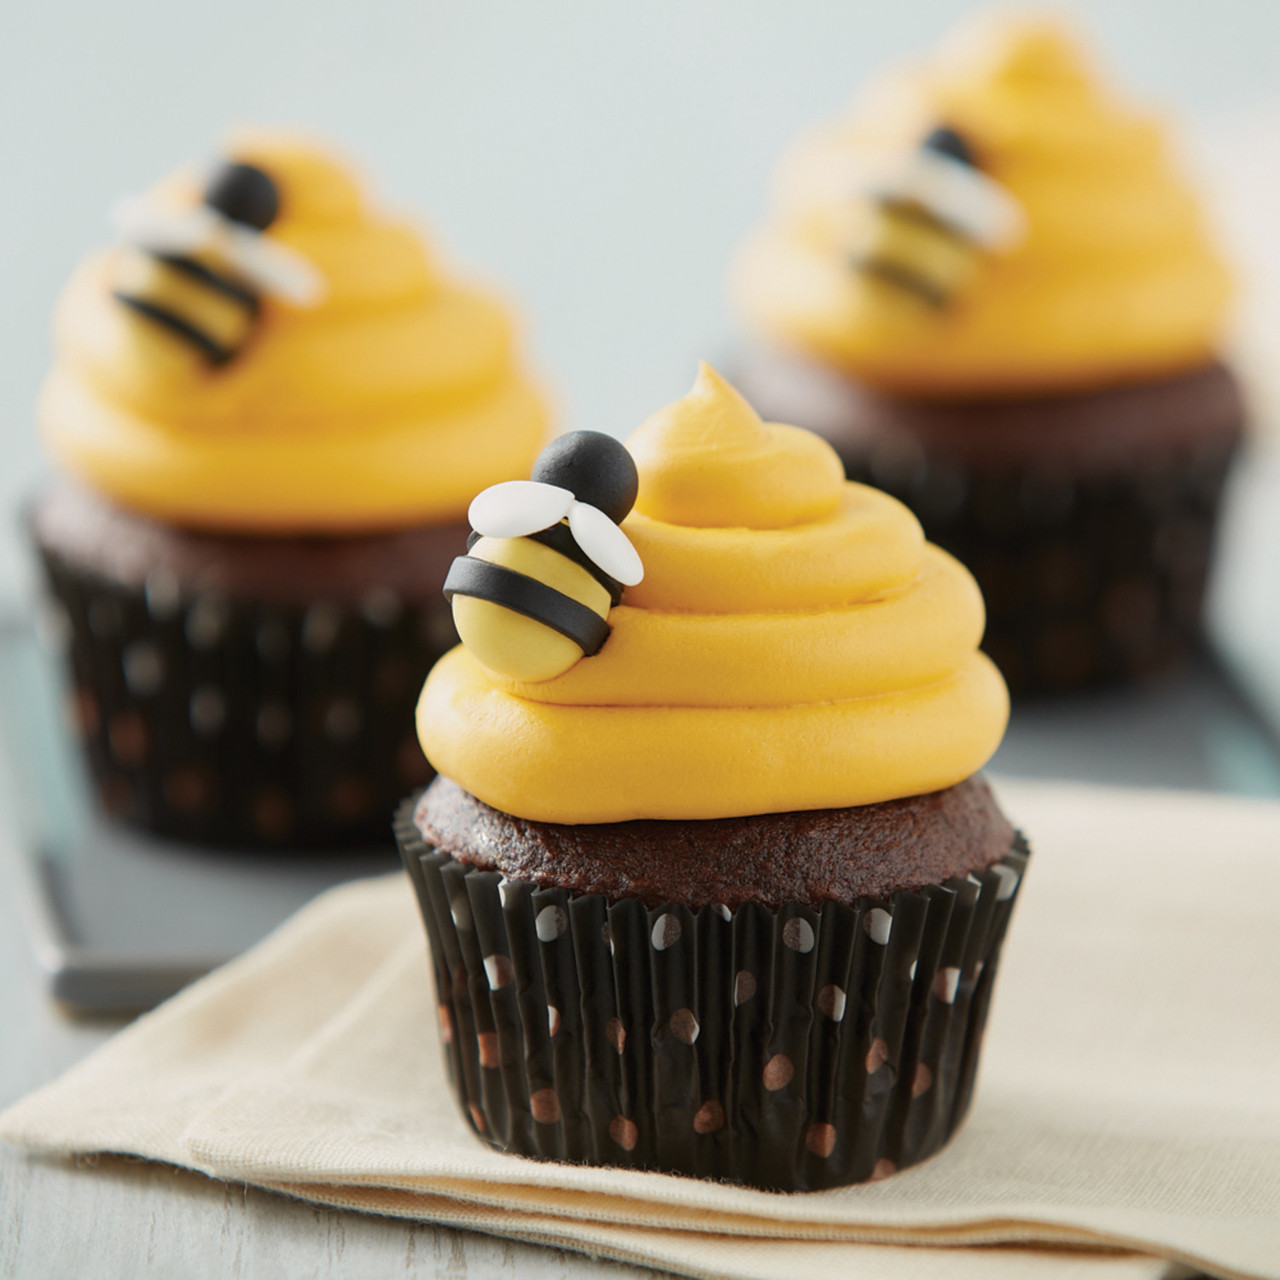 Fondant Beetle and Bee Cupcake Toppers - Queen Fine Foods